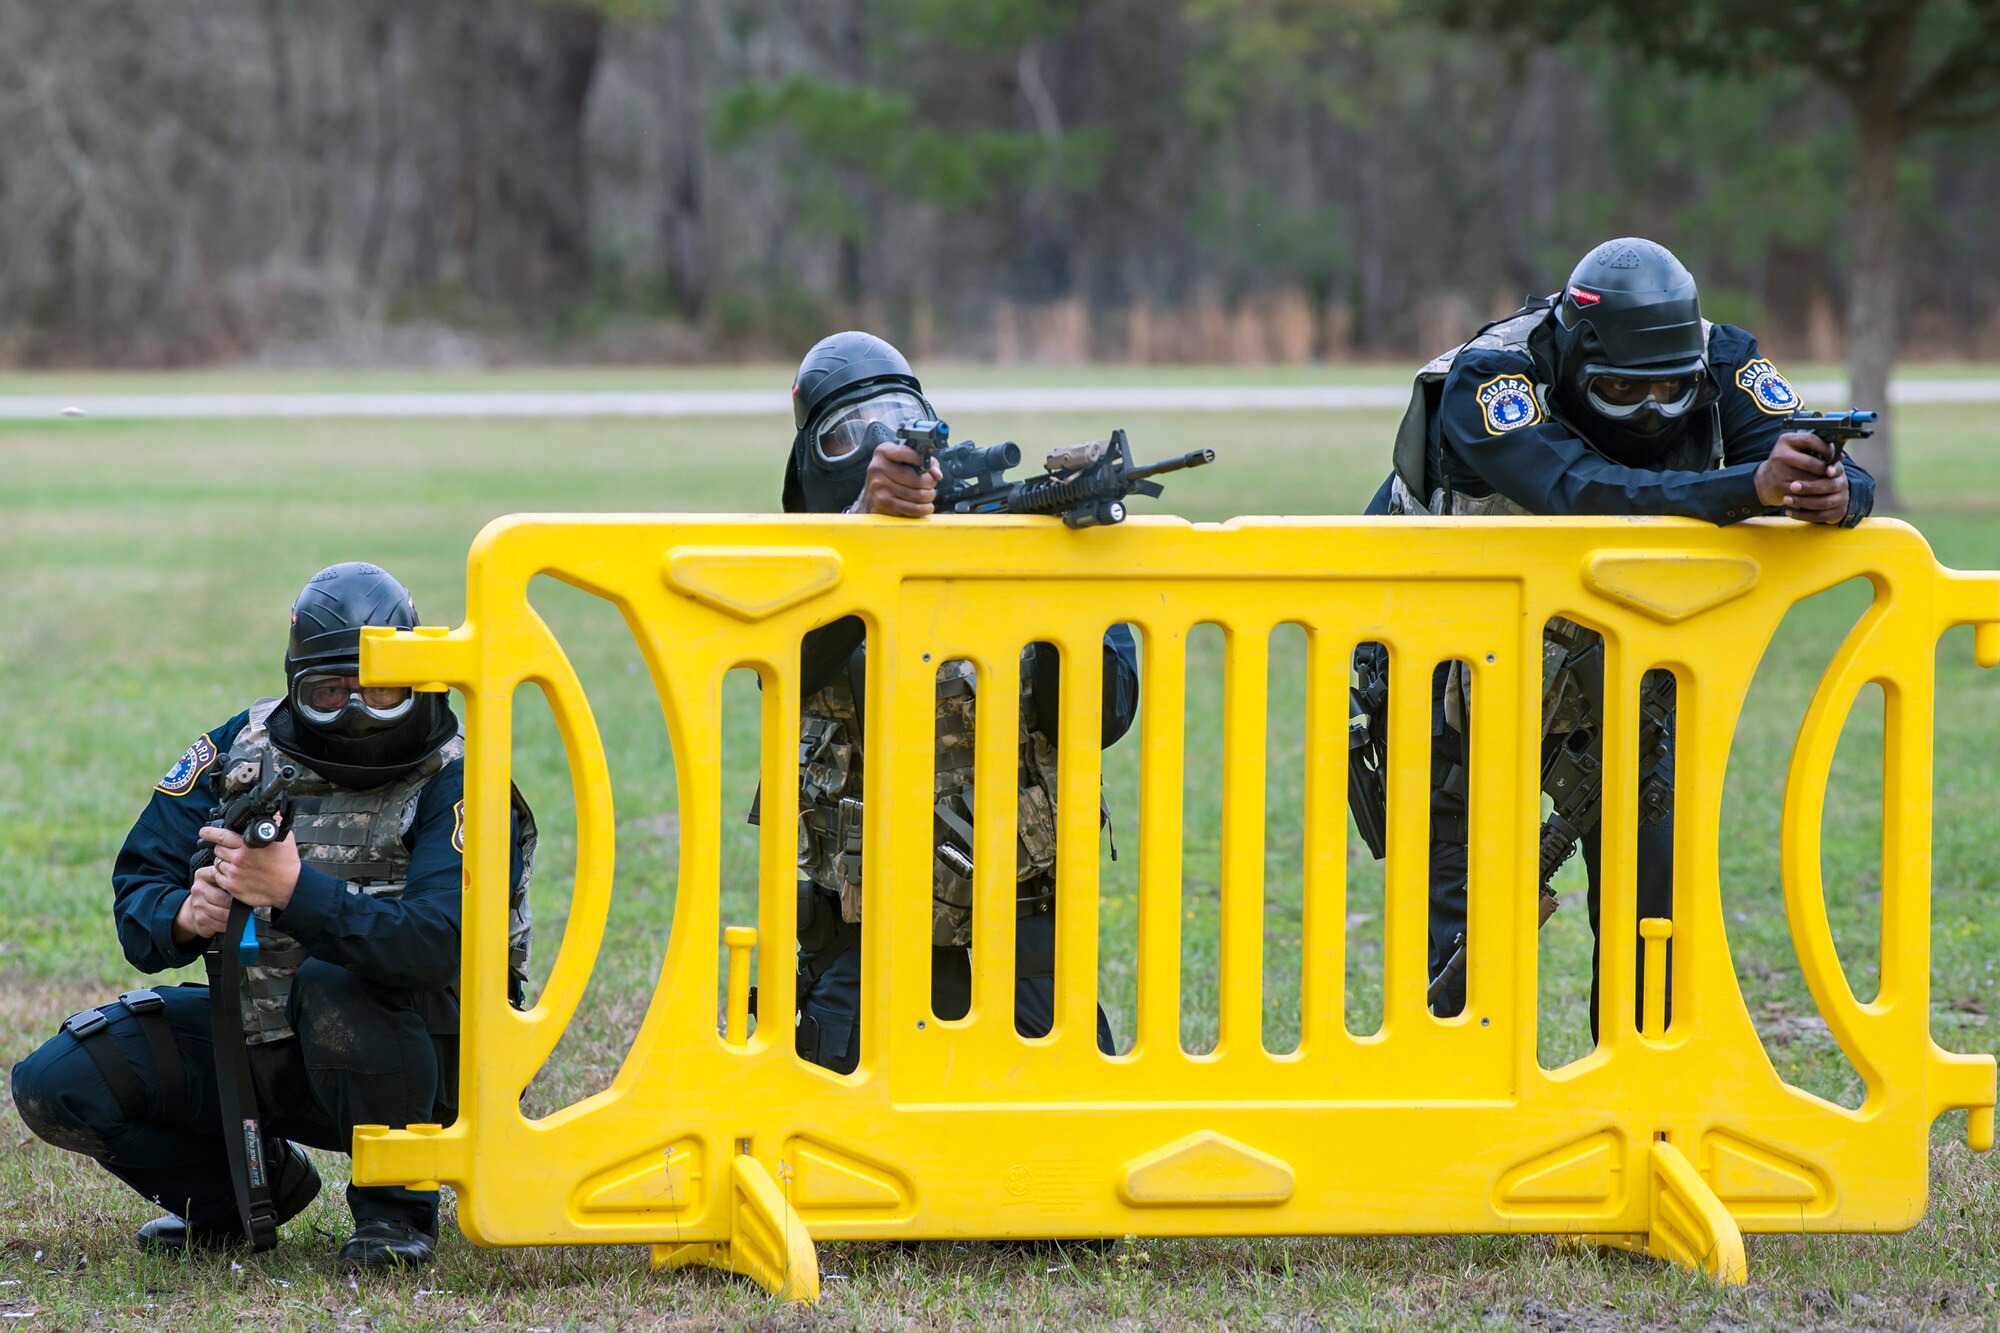 Personnel from the 23d Security Forces Squadron defend their positions during a shoot, move, communicate, training, Feb. 22, 2018, at Moody Air Force Base, Ga.  The Shoot, move, communicate training event is designed to test participants on their ability to move from barricade to barricade as a team. To be successful, one member provided covering fire while others advanced on the enemy, then retreated from the scenario while they maintained cover fire. Security Forces members could employ these tactics anytime they’re under enemy fire.
(U.S. Air Force photo by Airman Eugene Oliver)